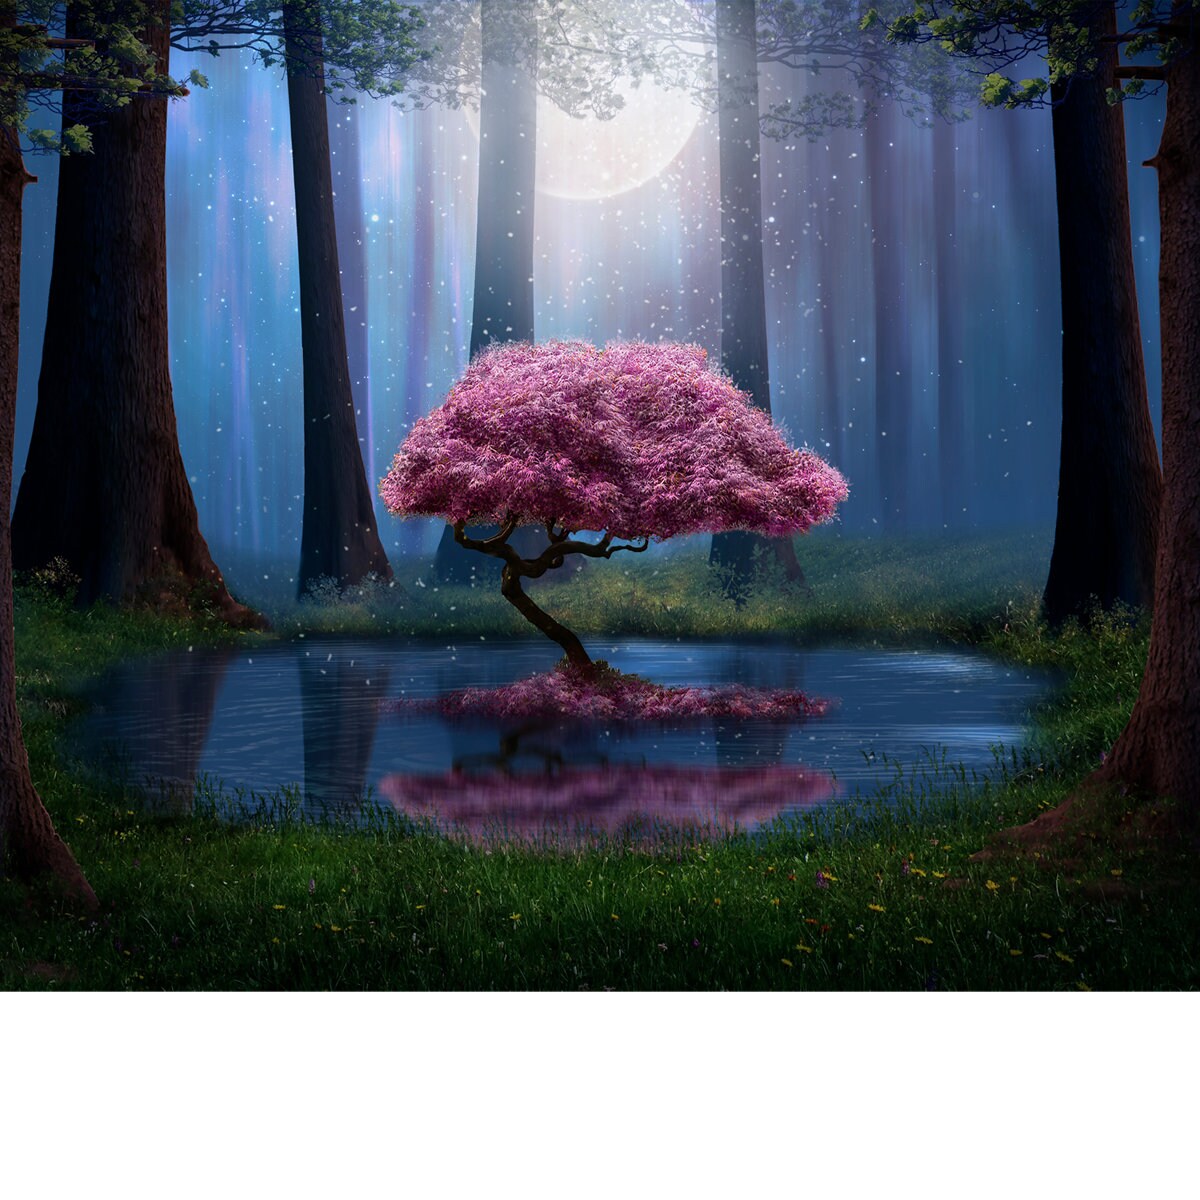 Pink Tree and Pond in the Forest at Night Wallpaper Girl Bedroom Mural